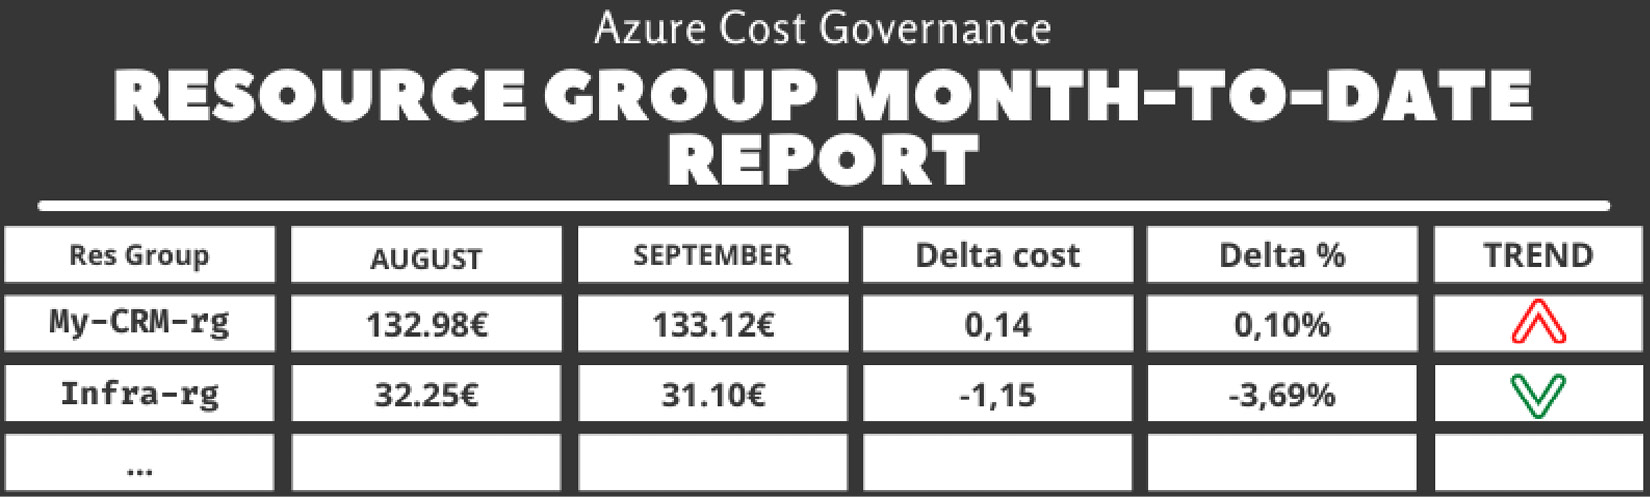 Table 5.4 – The resource group month-to-date report
